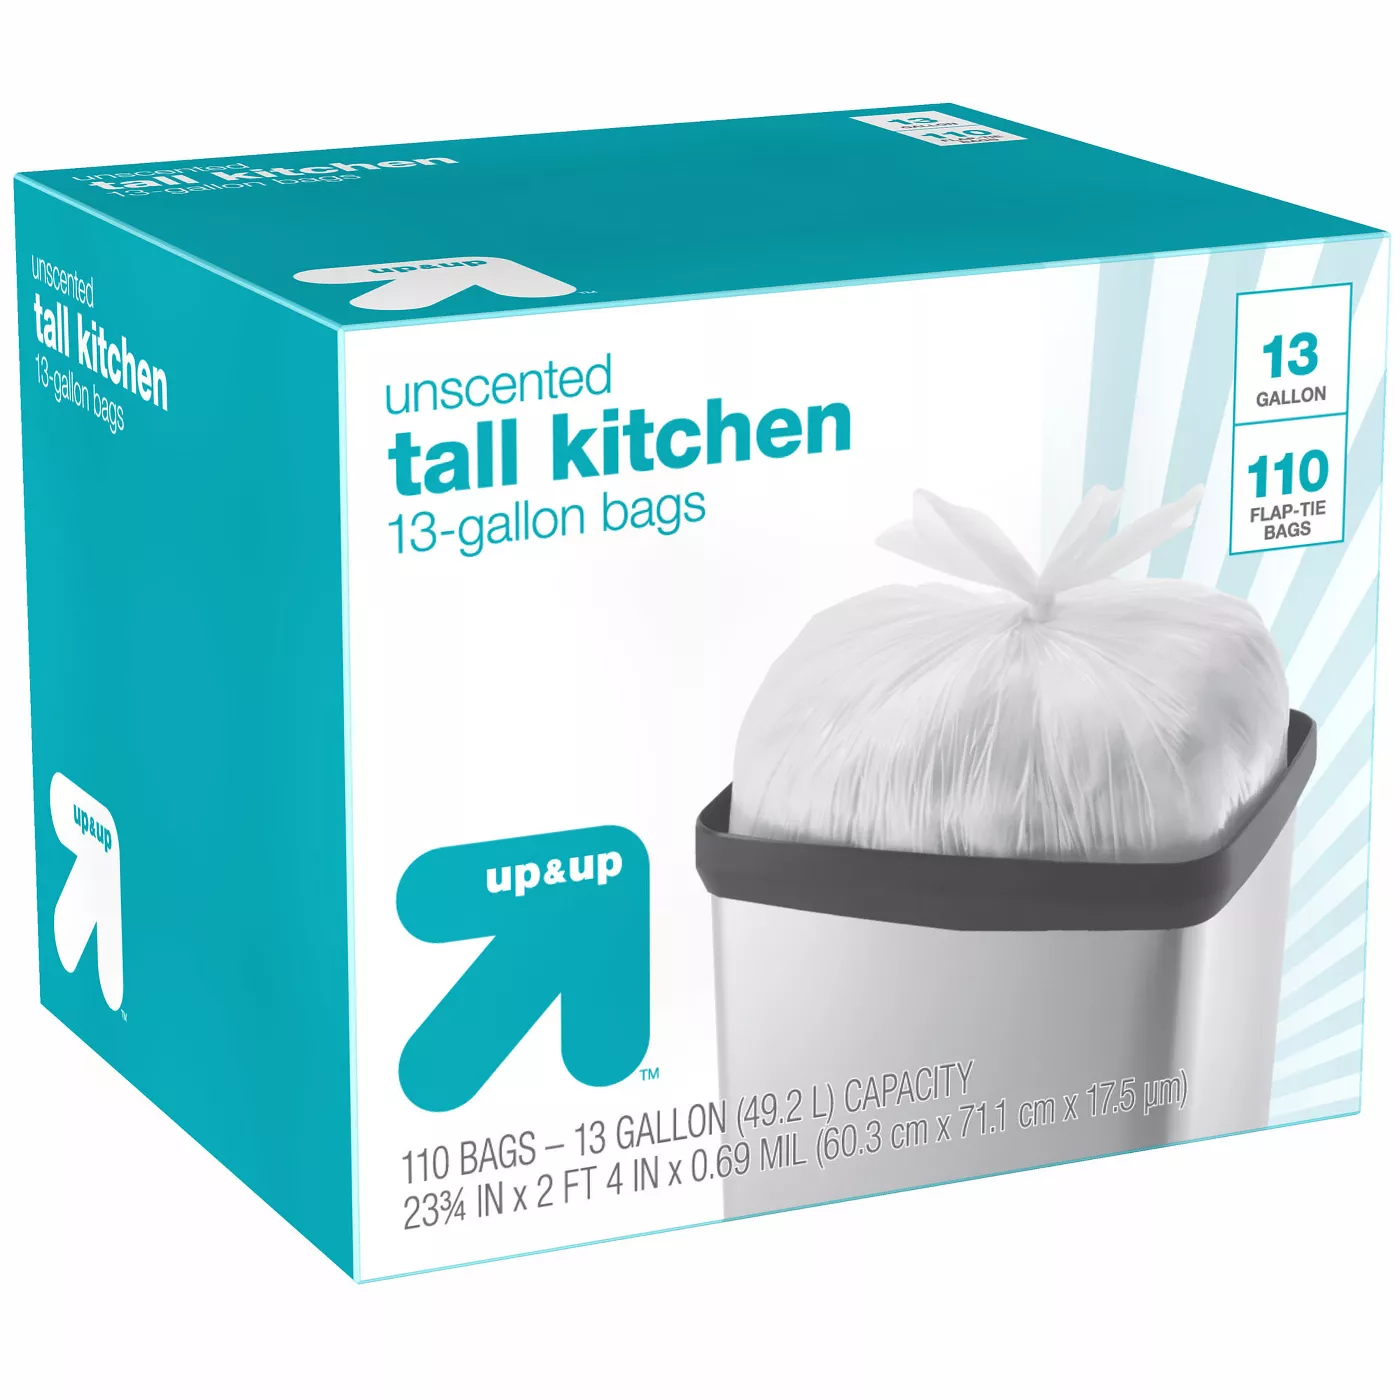 Tall Kitchen Flap-Tie Trash Bags - 13 Gallon - 110ct - Up&Up™ - image 1 of 1